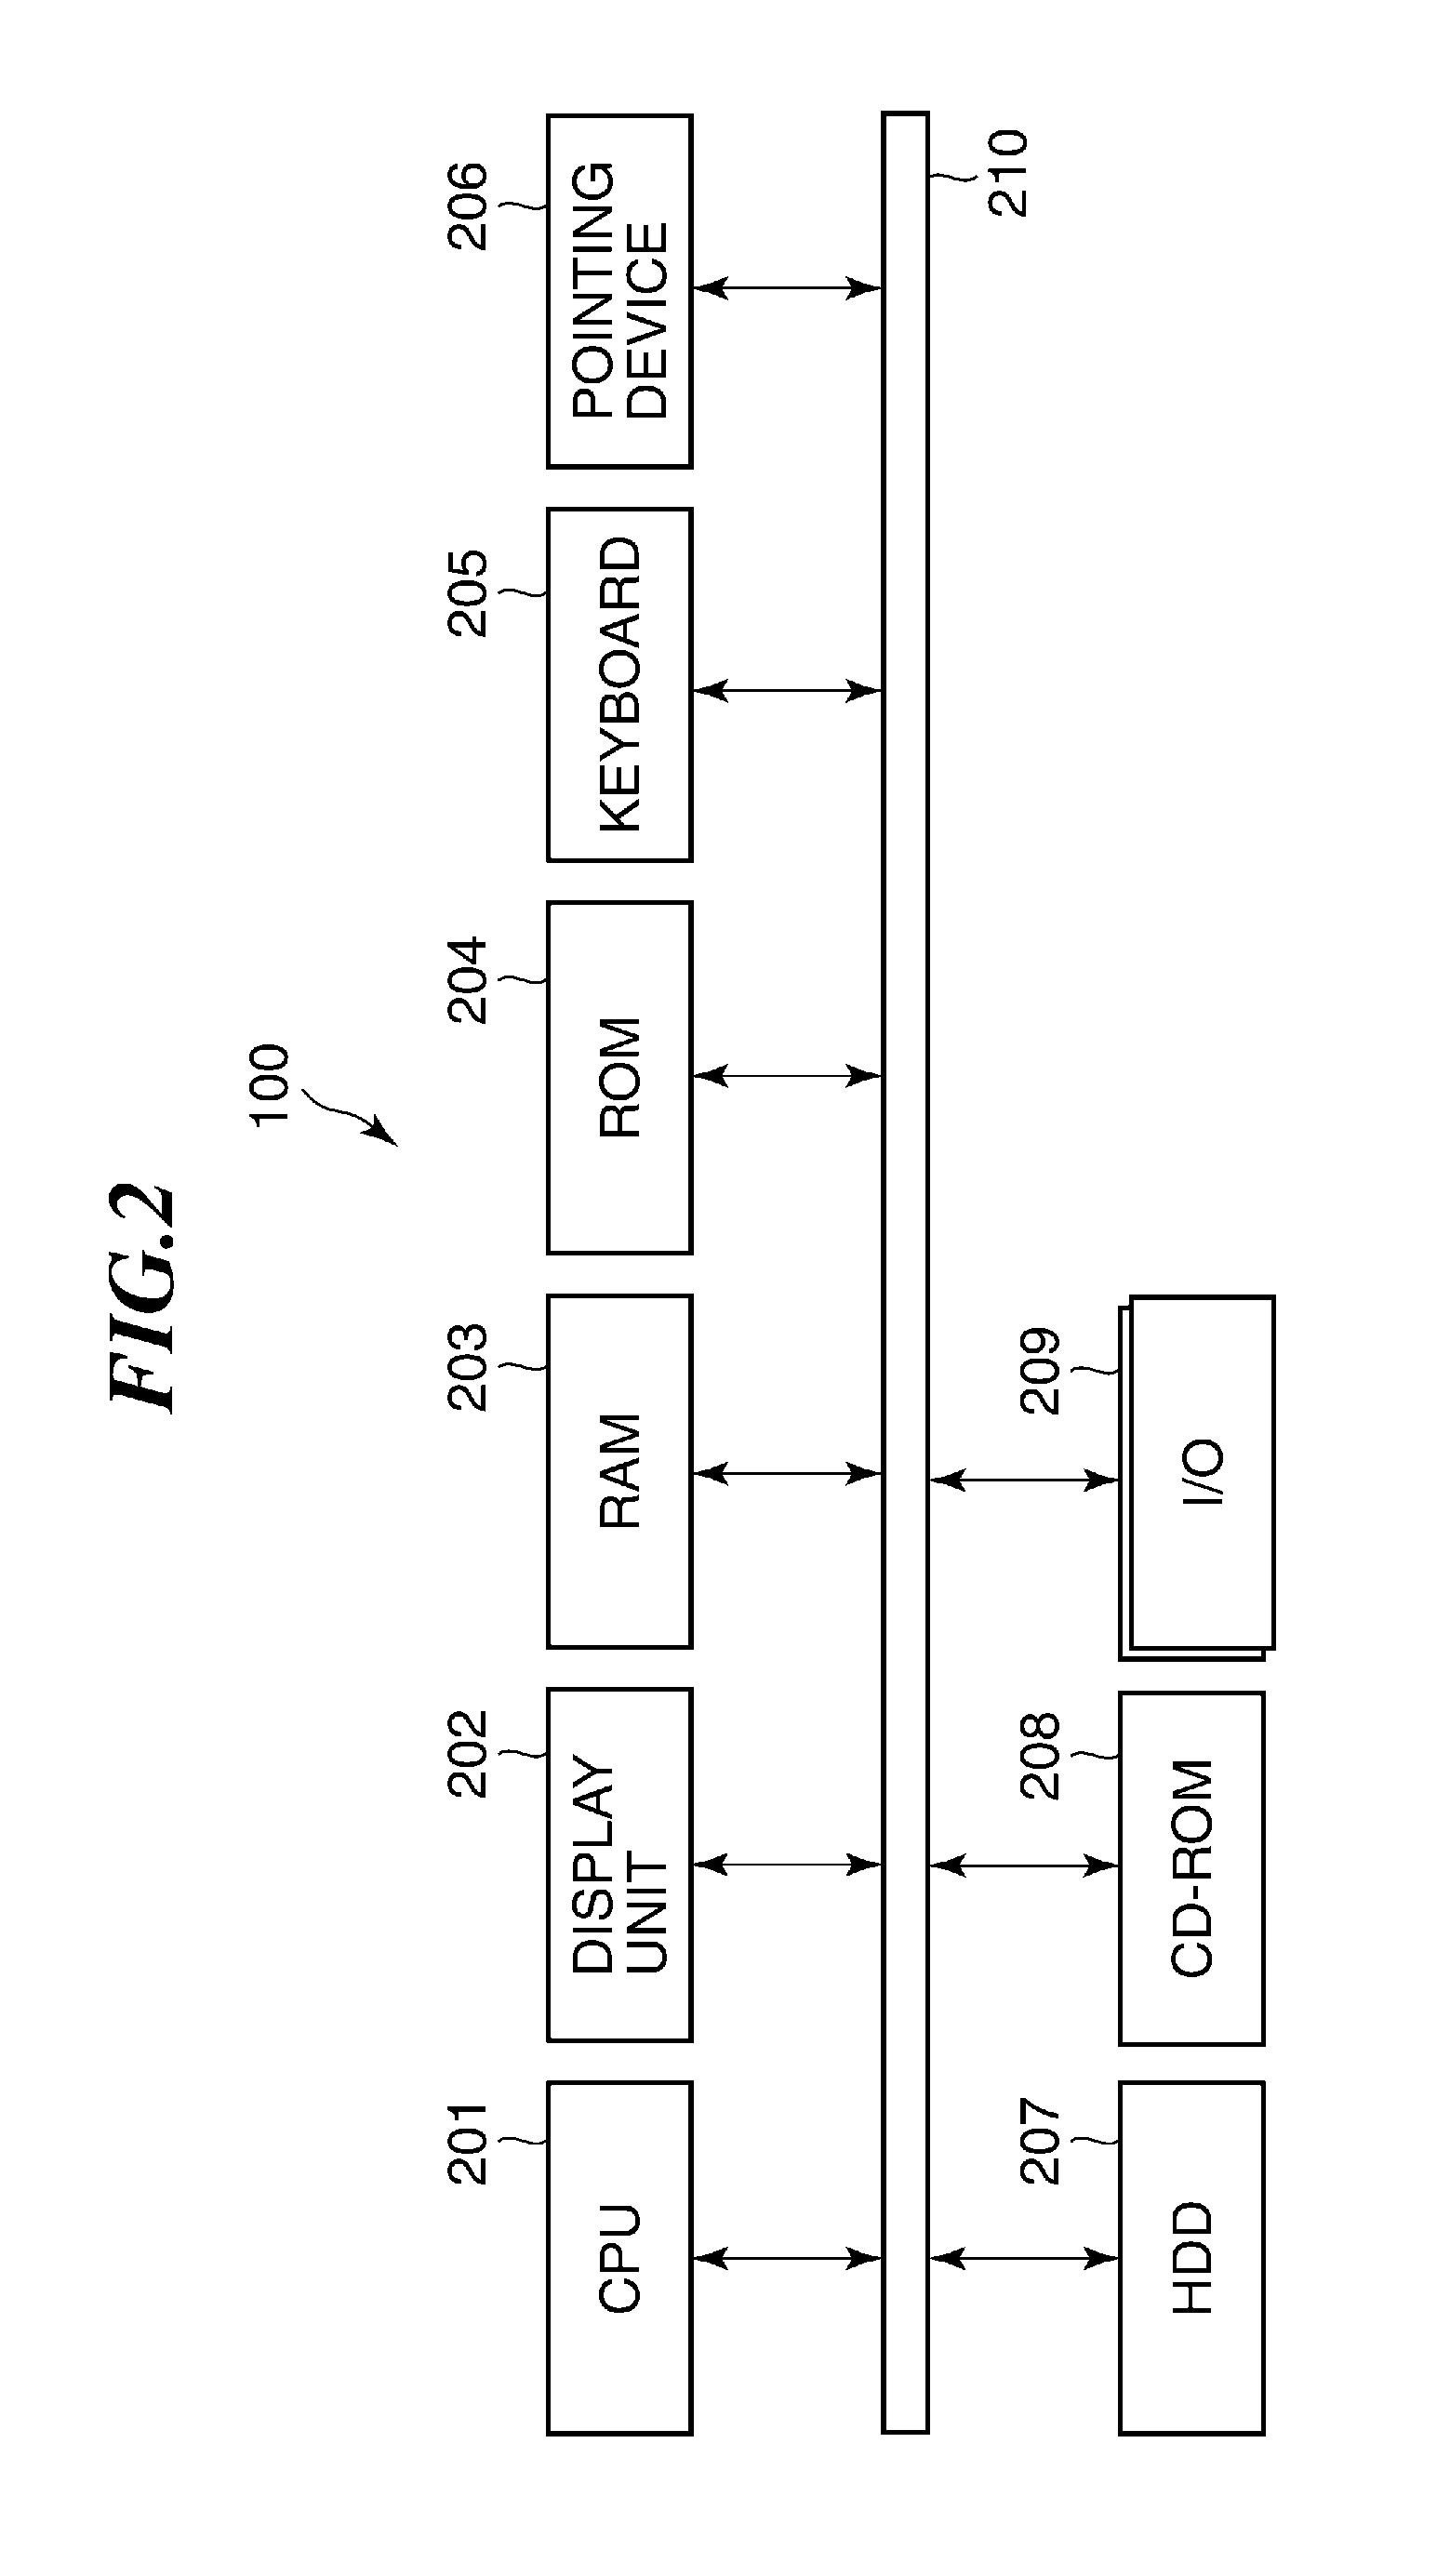 Information processing apparatus capable of setting configuration information for use by an image processing apparatus, and control method and storage medium therefor